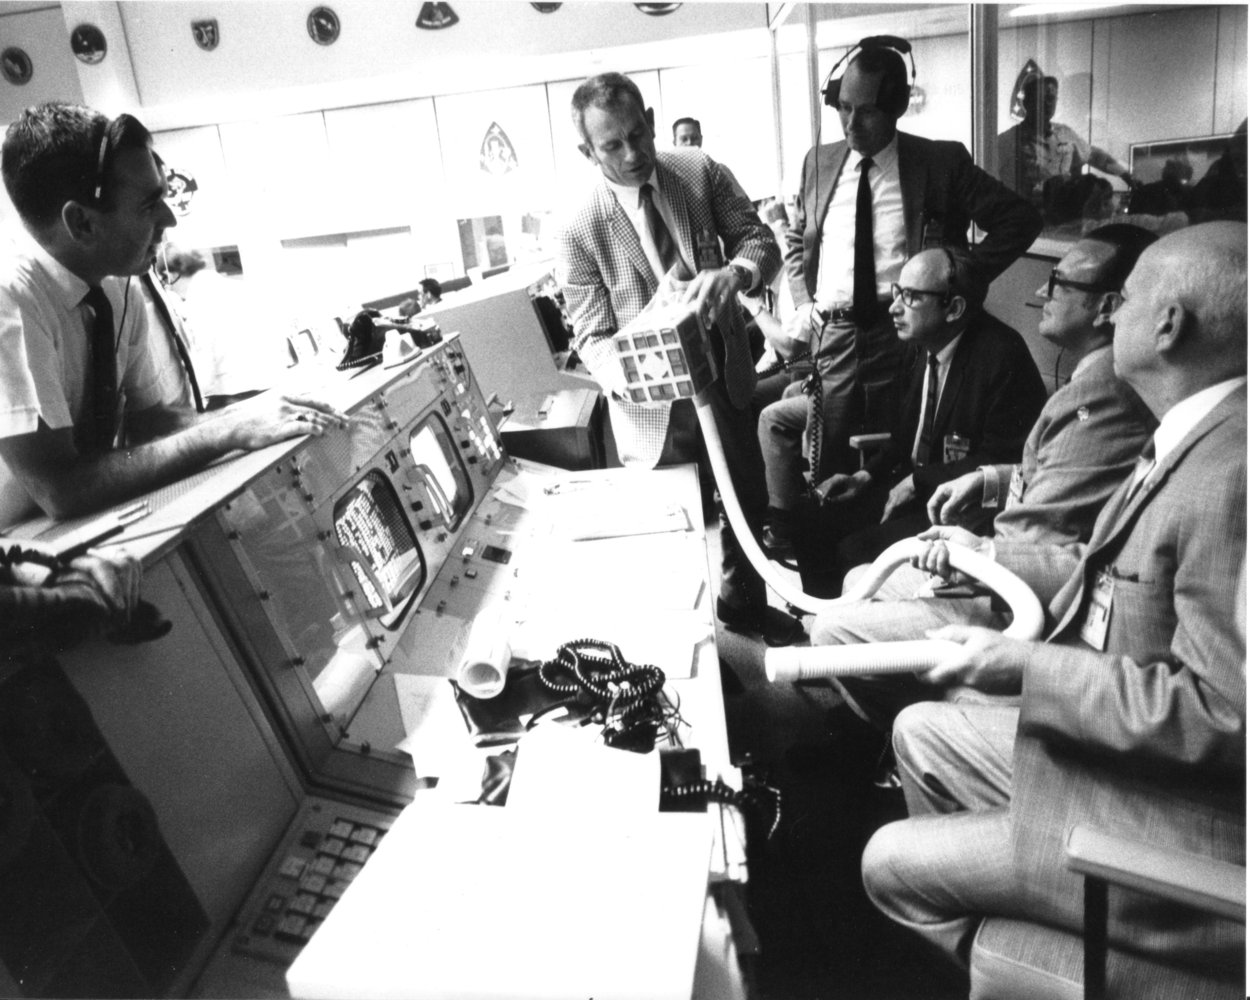  Deke Slayton (check jacket) shows the adapter devised to make use of square Command Module lithium hydroxide canisters to remove excess carbon dioxide from the Apollo 13 LM cabin. As detailed in Lost Moon by Jim Lovell and Jeffrey Kluger, the adapter...